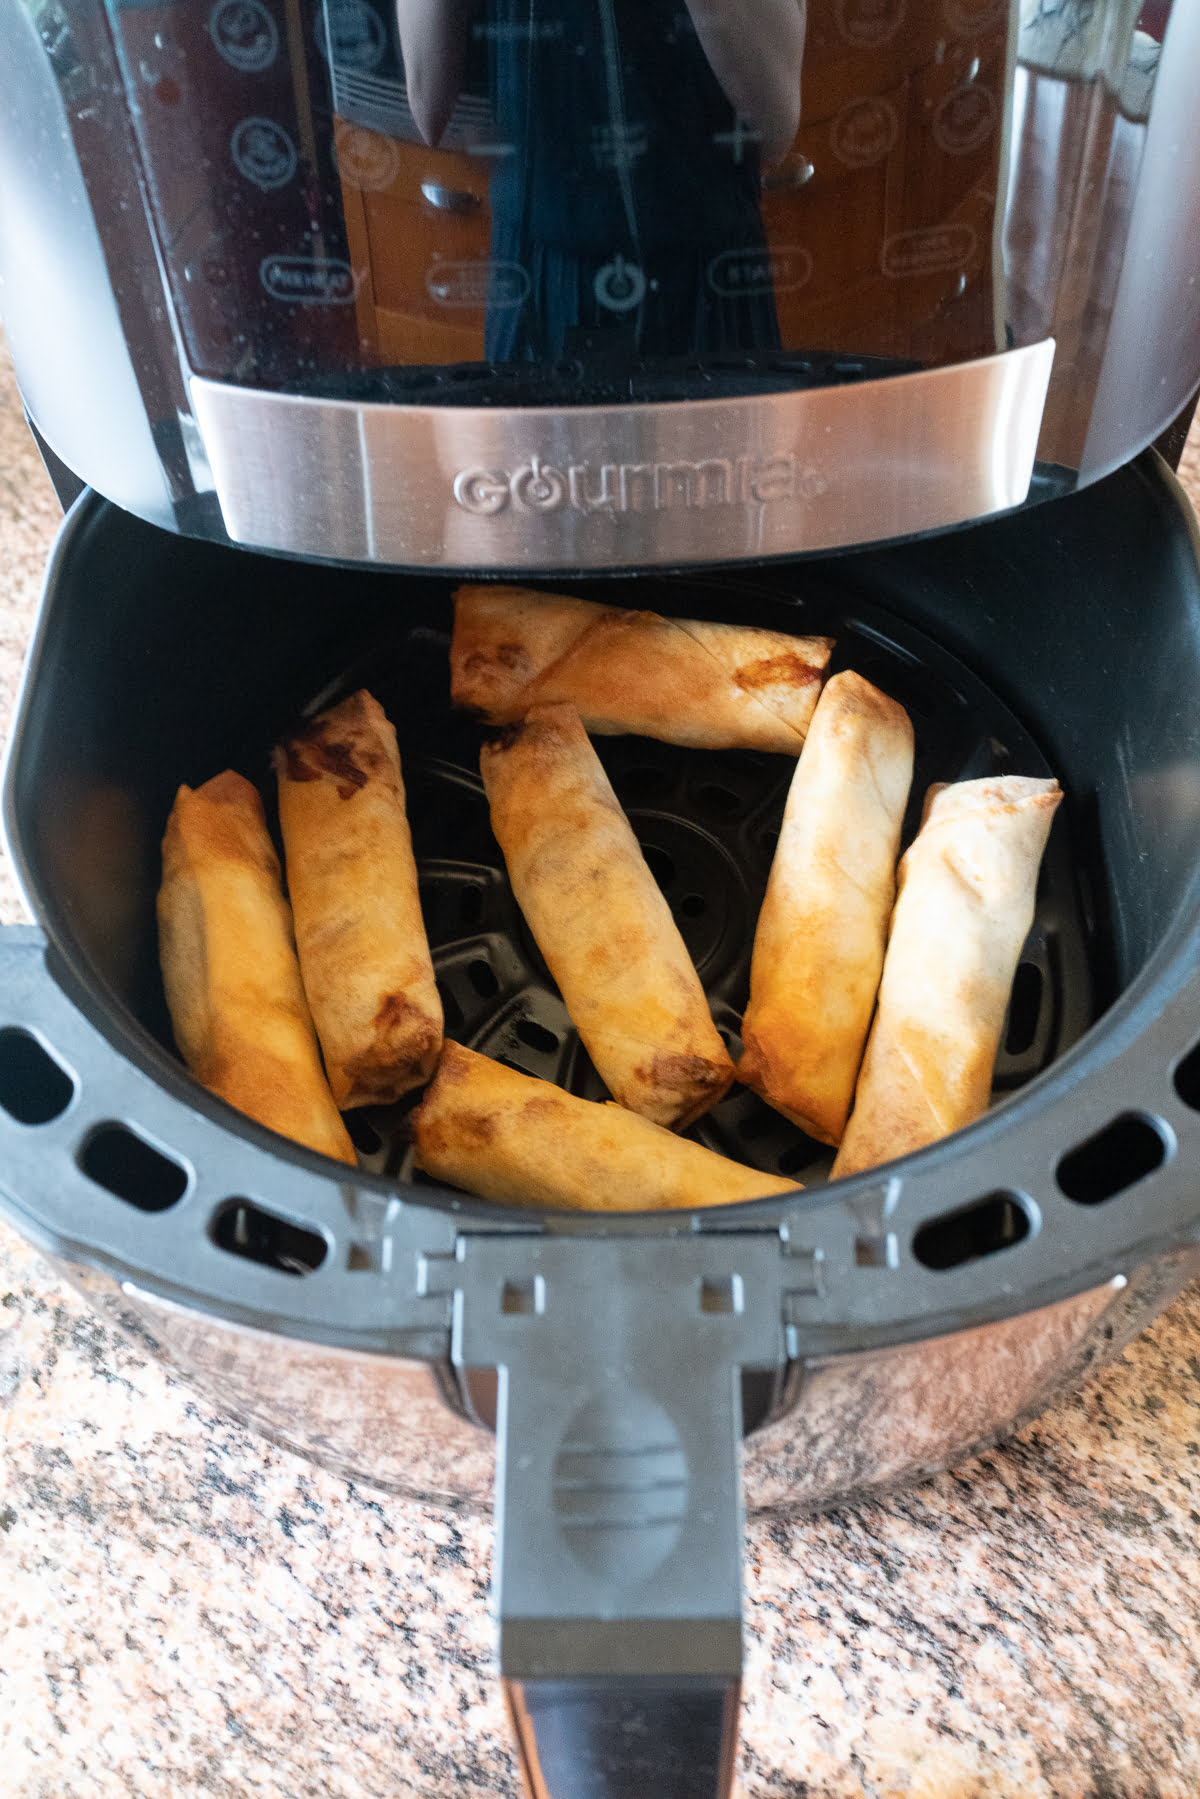 Lumpia fried in the air fryer.